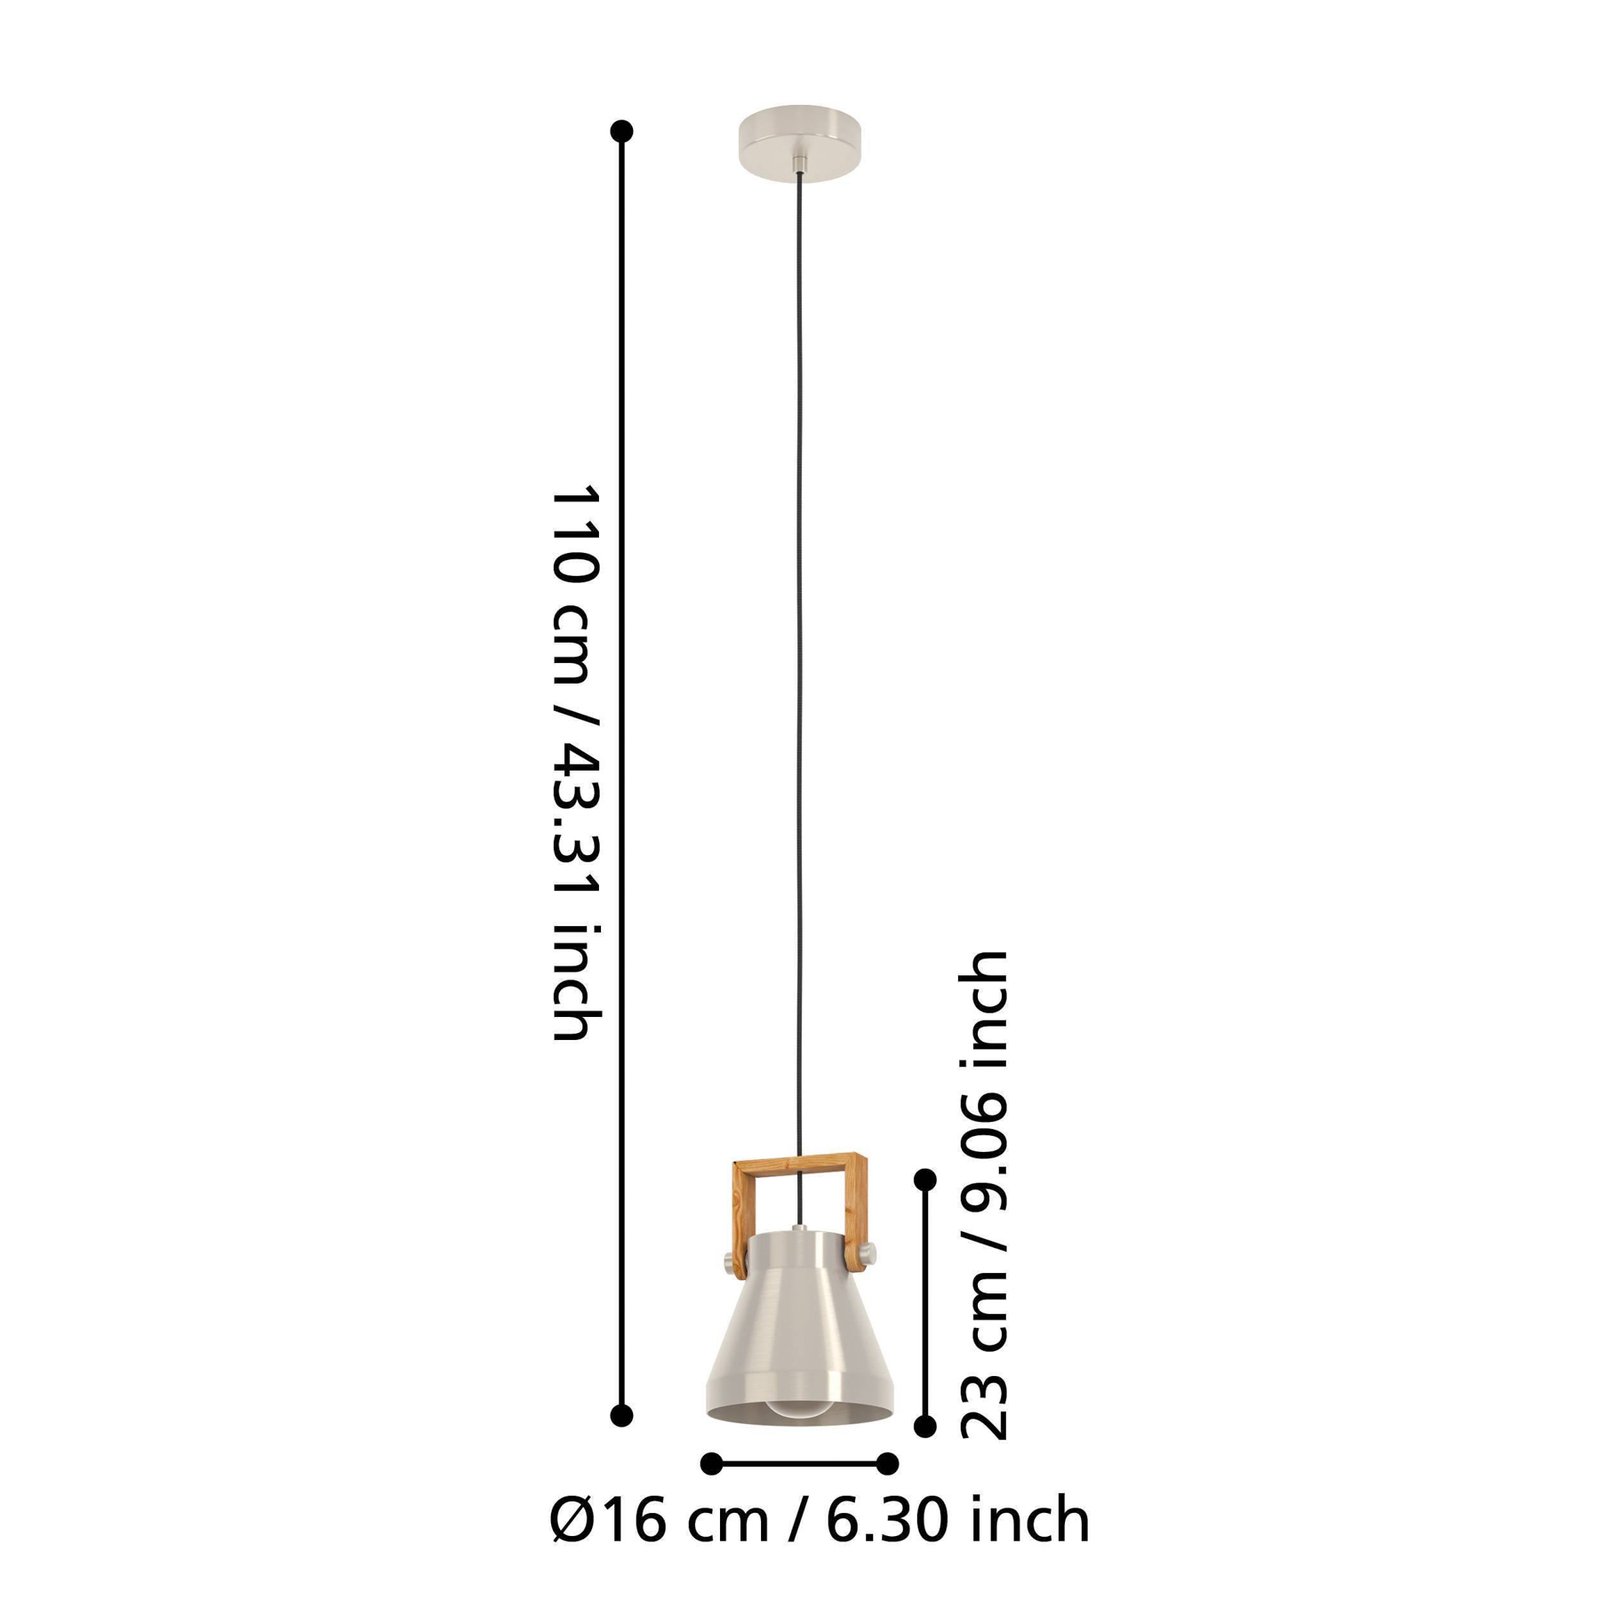 Cawton hanglamp, Ø 16 cm, staal/bruin, staal/hout